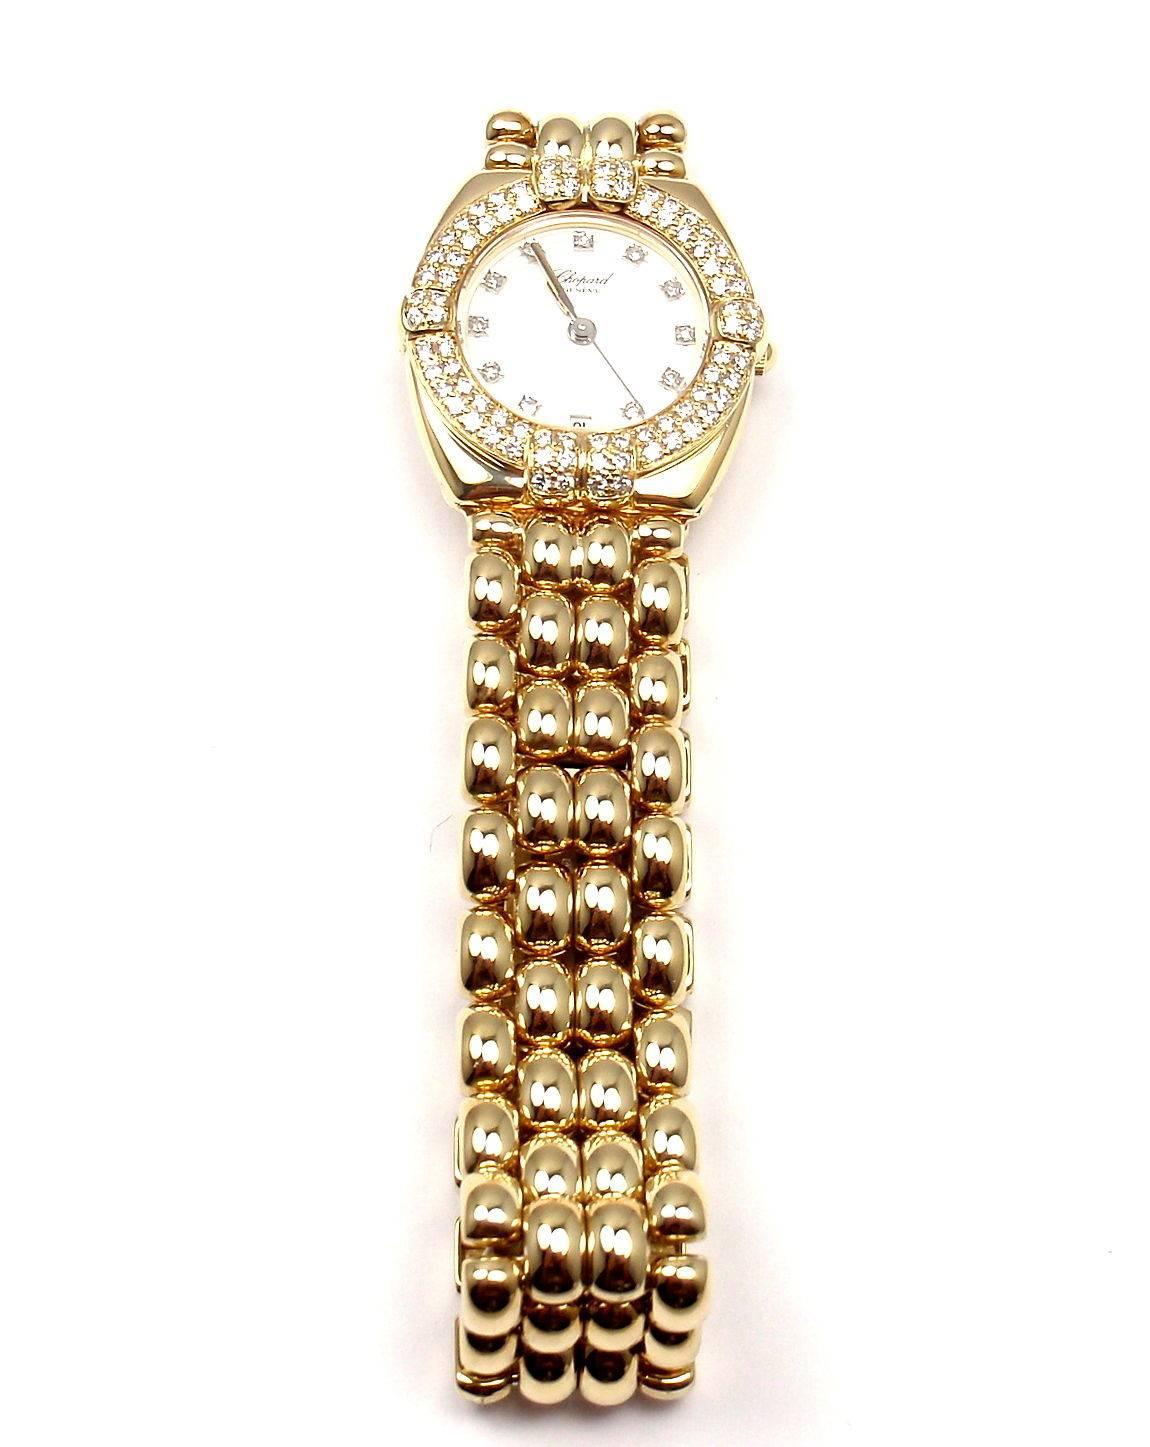 Chopard Ladies 18k yellow gold and diamond Gstaad wristwatch, Ref. 32/5120 11. 

Chopard Gstaad in 18k yellow gold. Reference: 32/5120 11
Watch quartz. 
Case in 18k yellow gold 24mm
Movement Quartz.
Band in 18k solid yellow gold with fold over